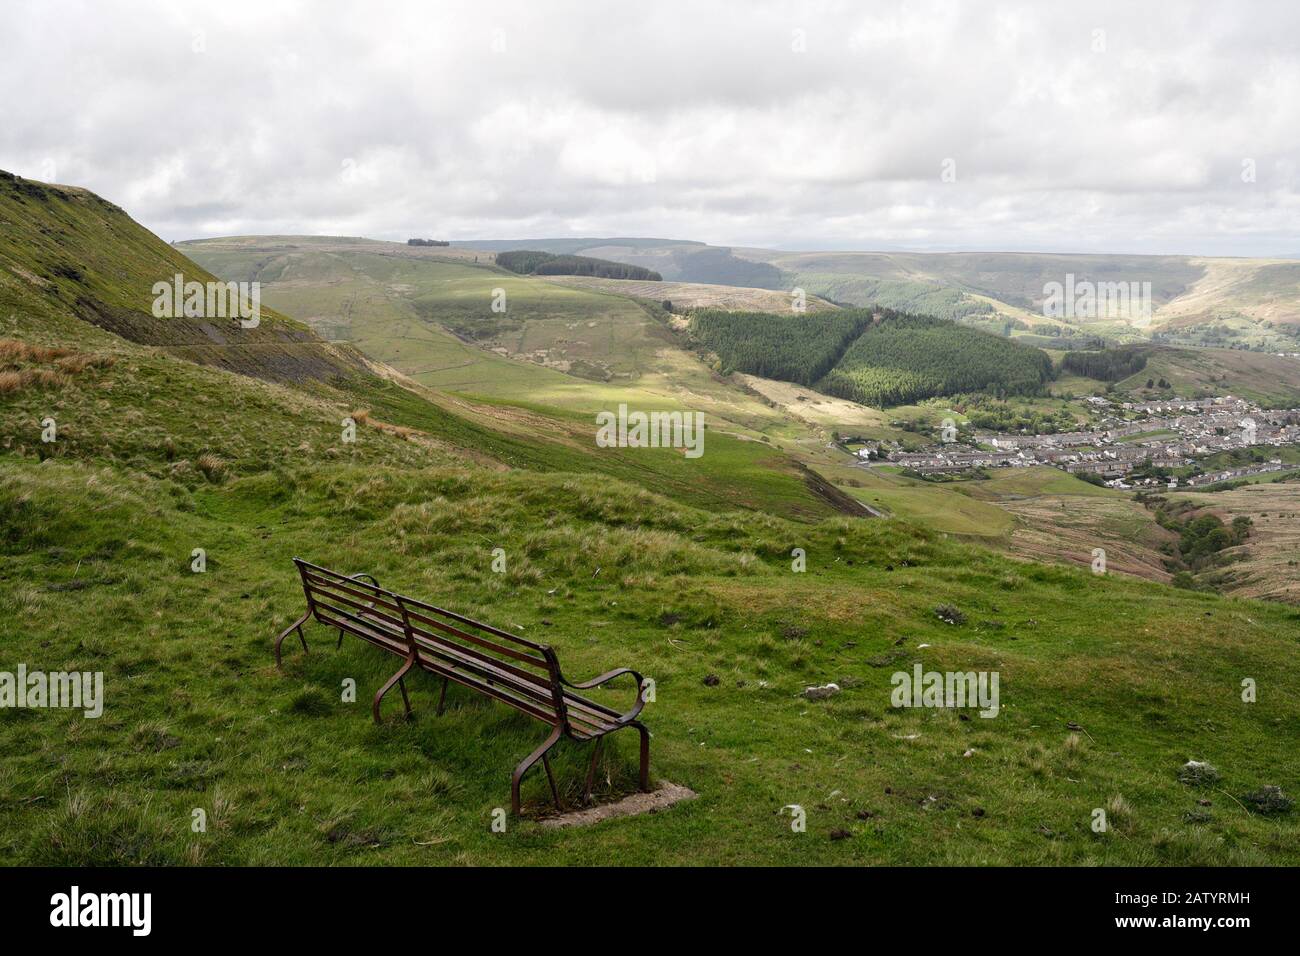 Rhondda valley towards Treorchy and Cwmparc from the Bwlch mountain pass, Wales, Welsh Valleys Stock Photo